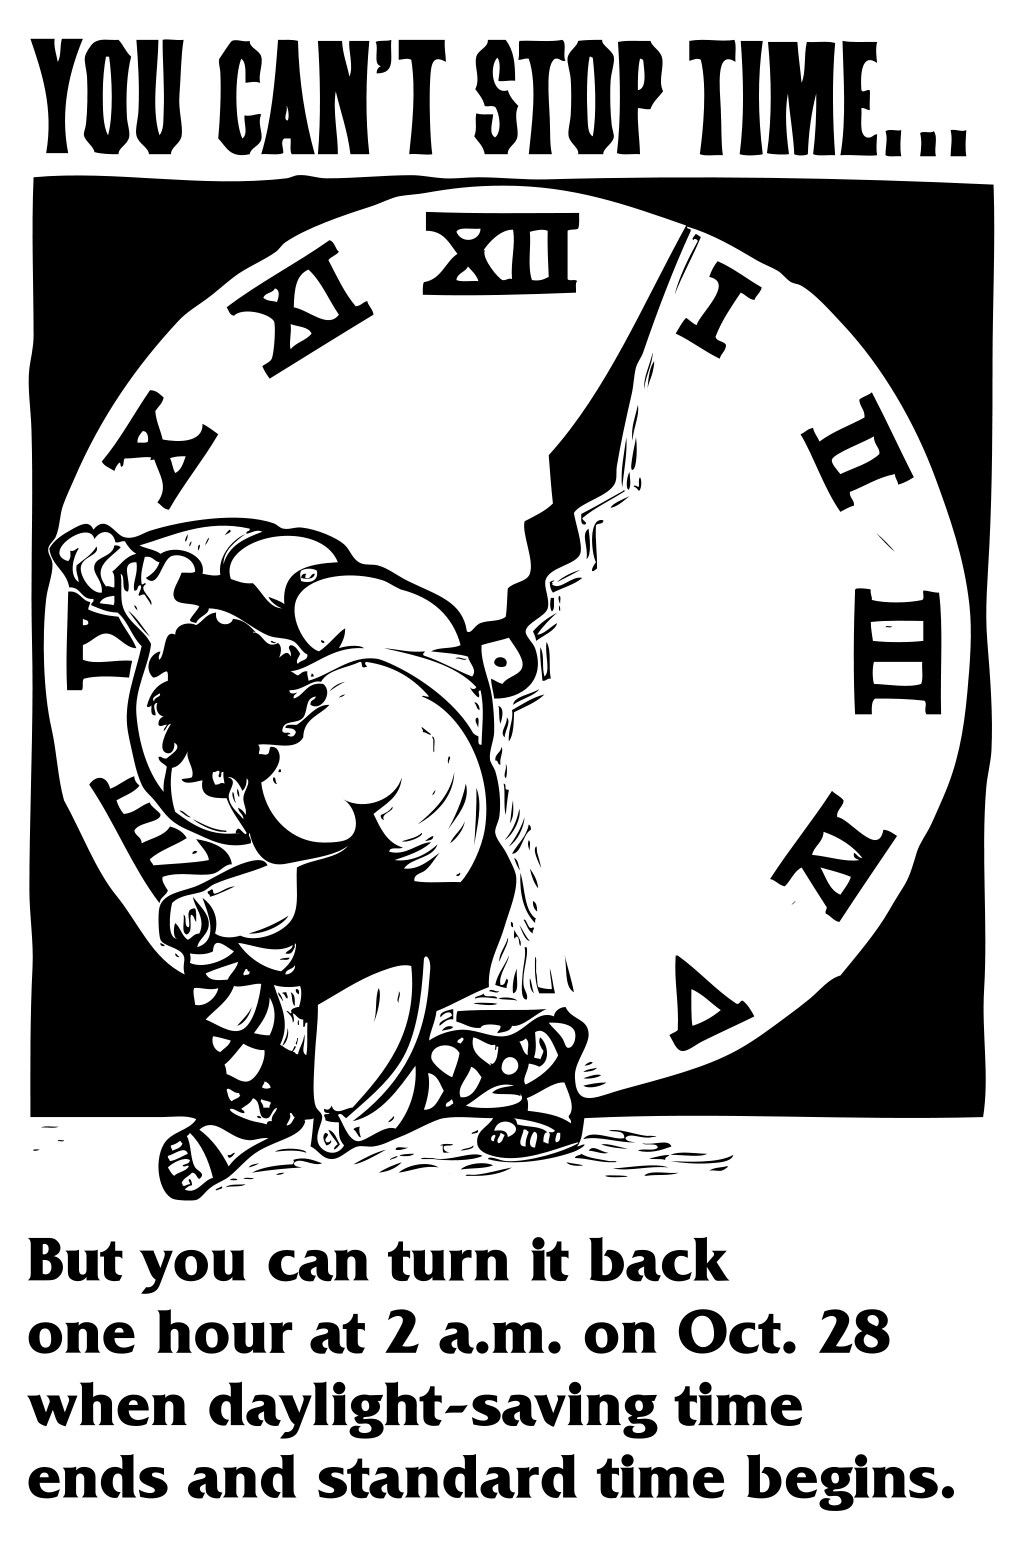 Daylight savings time promotion. A 2001 US public service advertisement reminded people to adjust clocks. Photo courtesy of Wikipedia